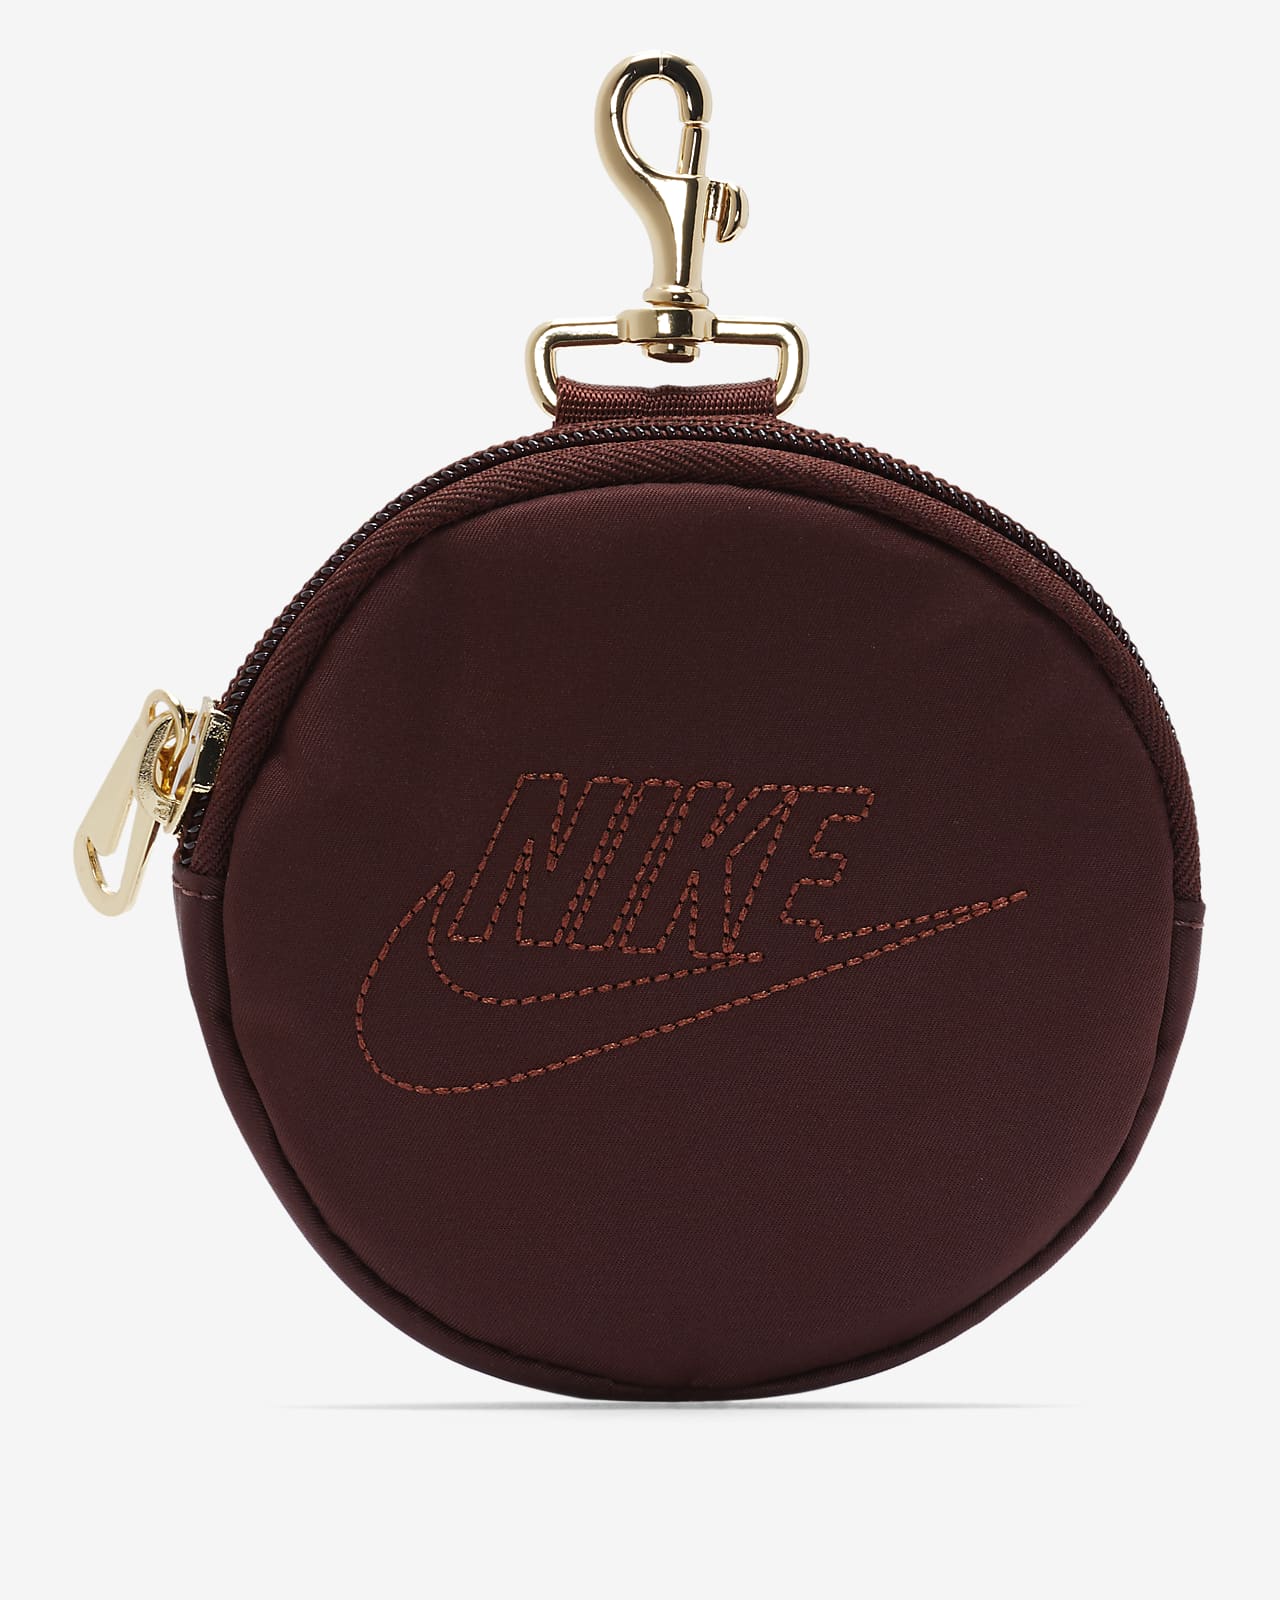 Nike Futura Luxe tote bag in burgundy with mini keyring pouch